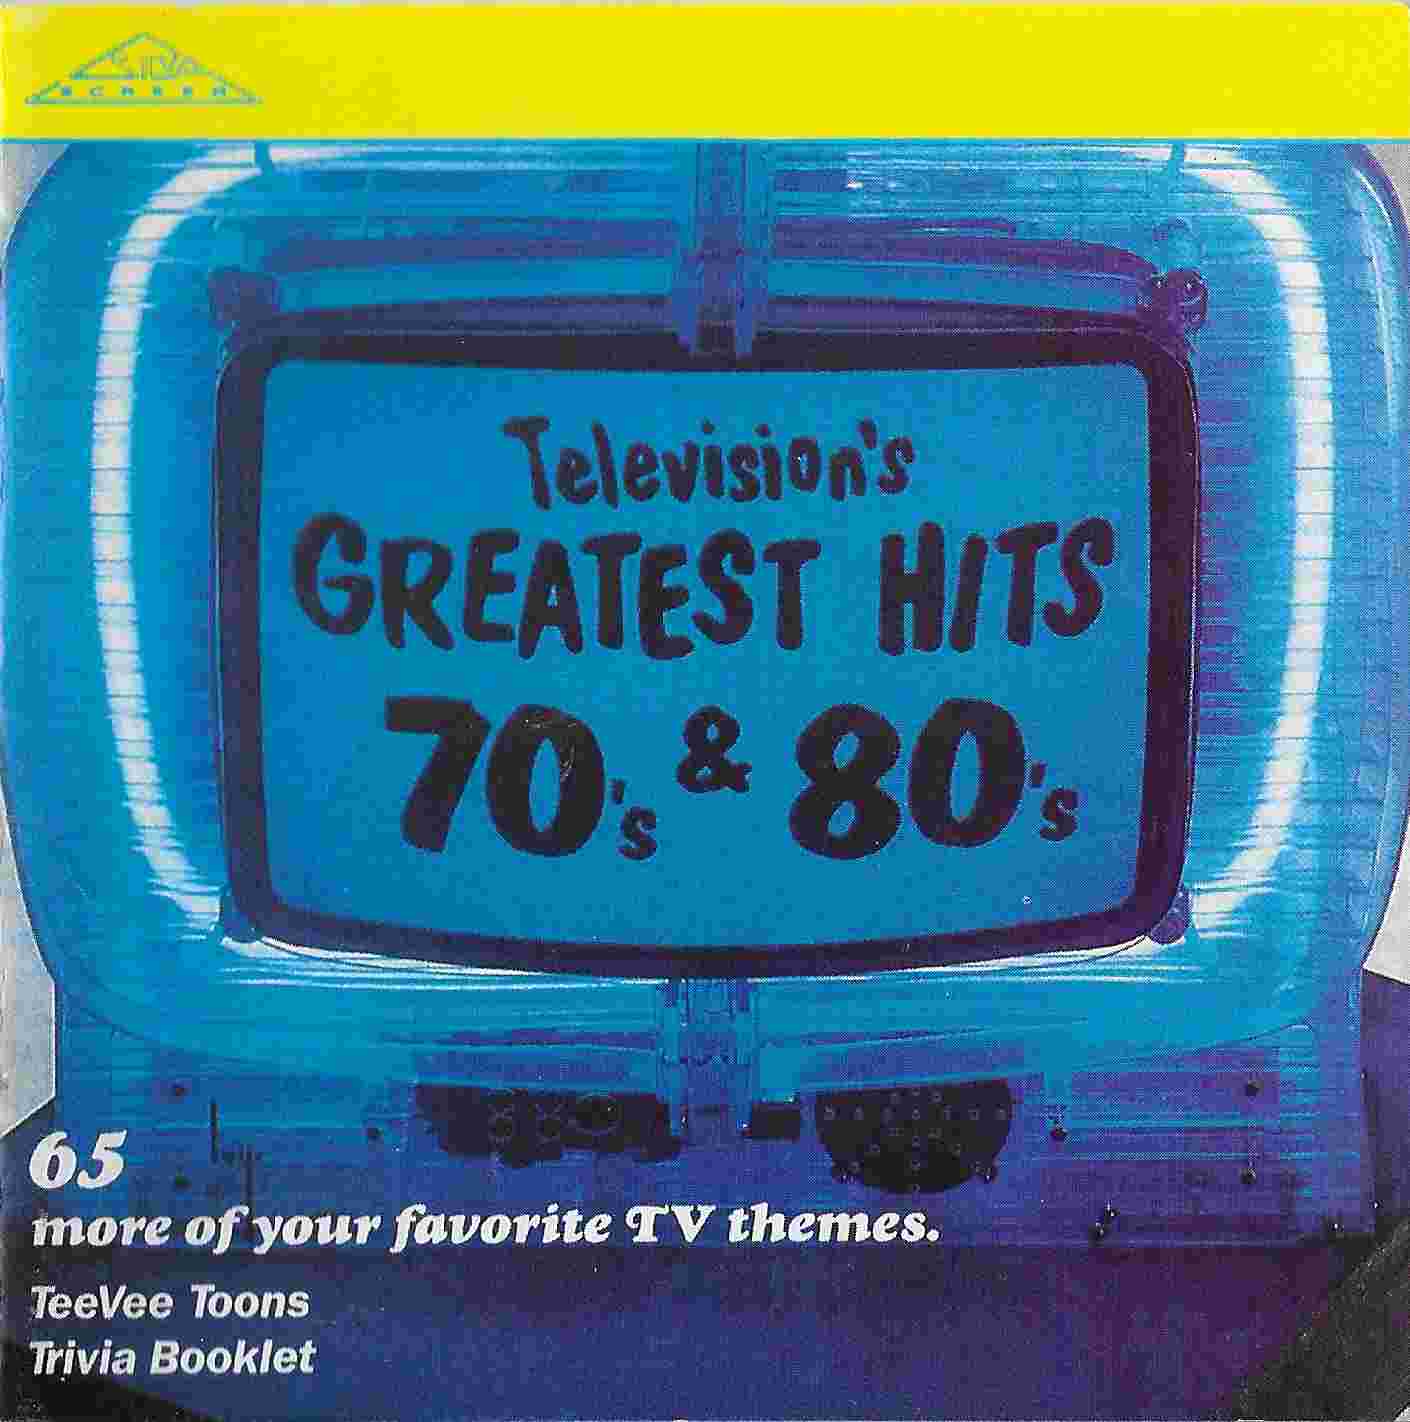 Picture of FILMCD 035 Television's greatest hits - Volume 3 by artist Various from ITV, Channel 4 and Channel 5 cds library